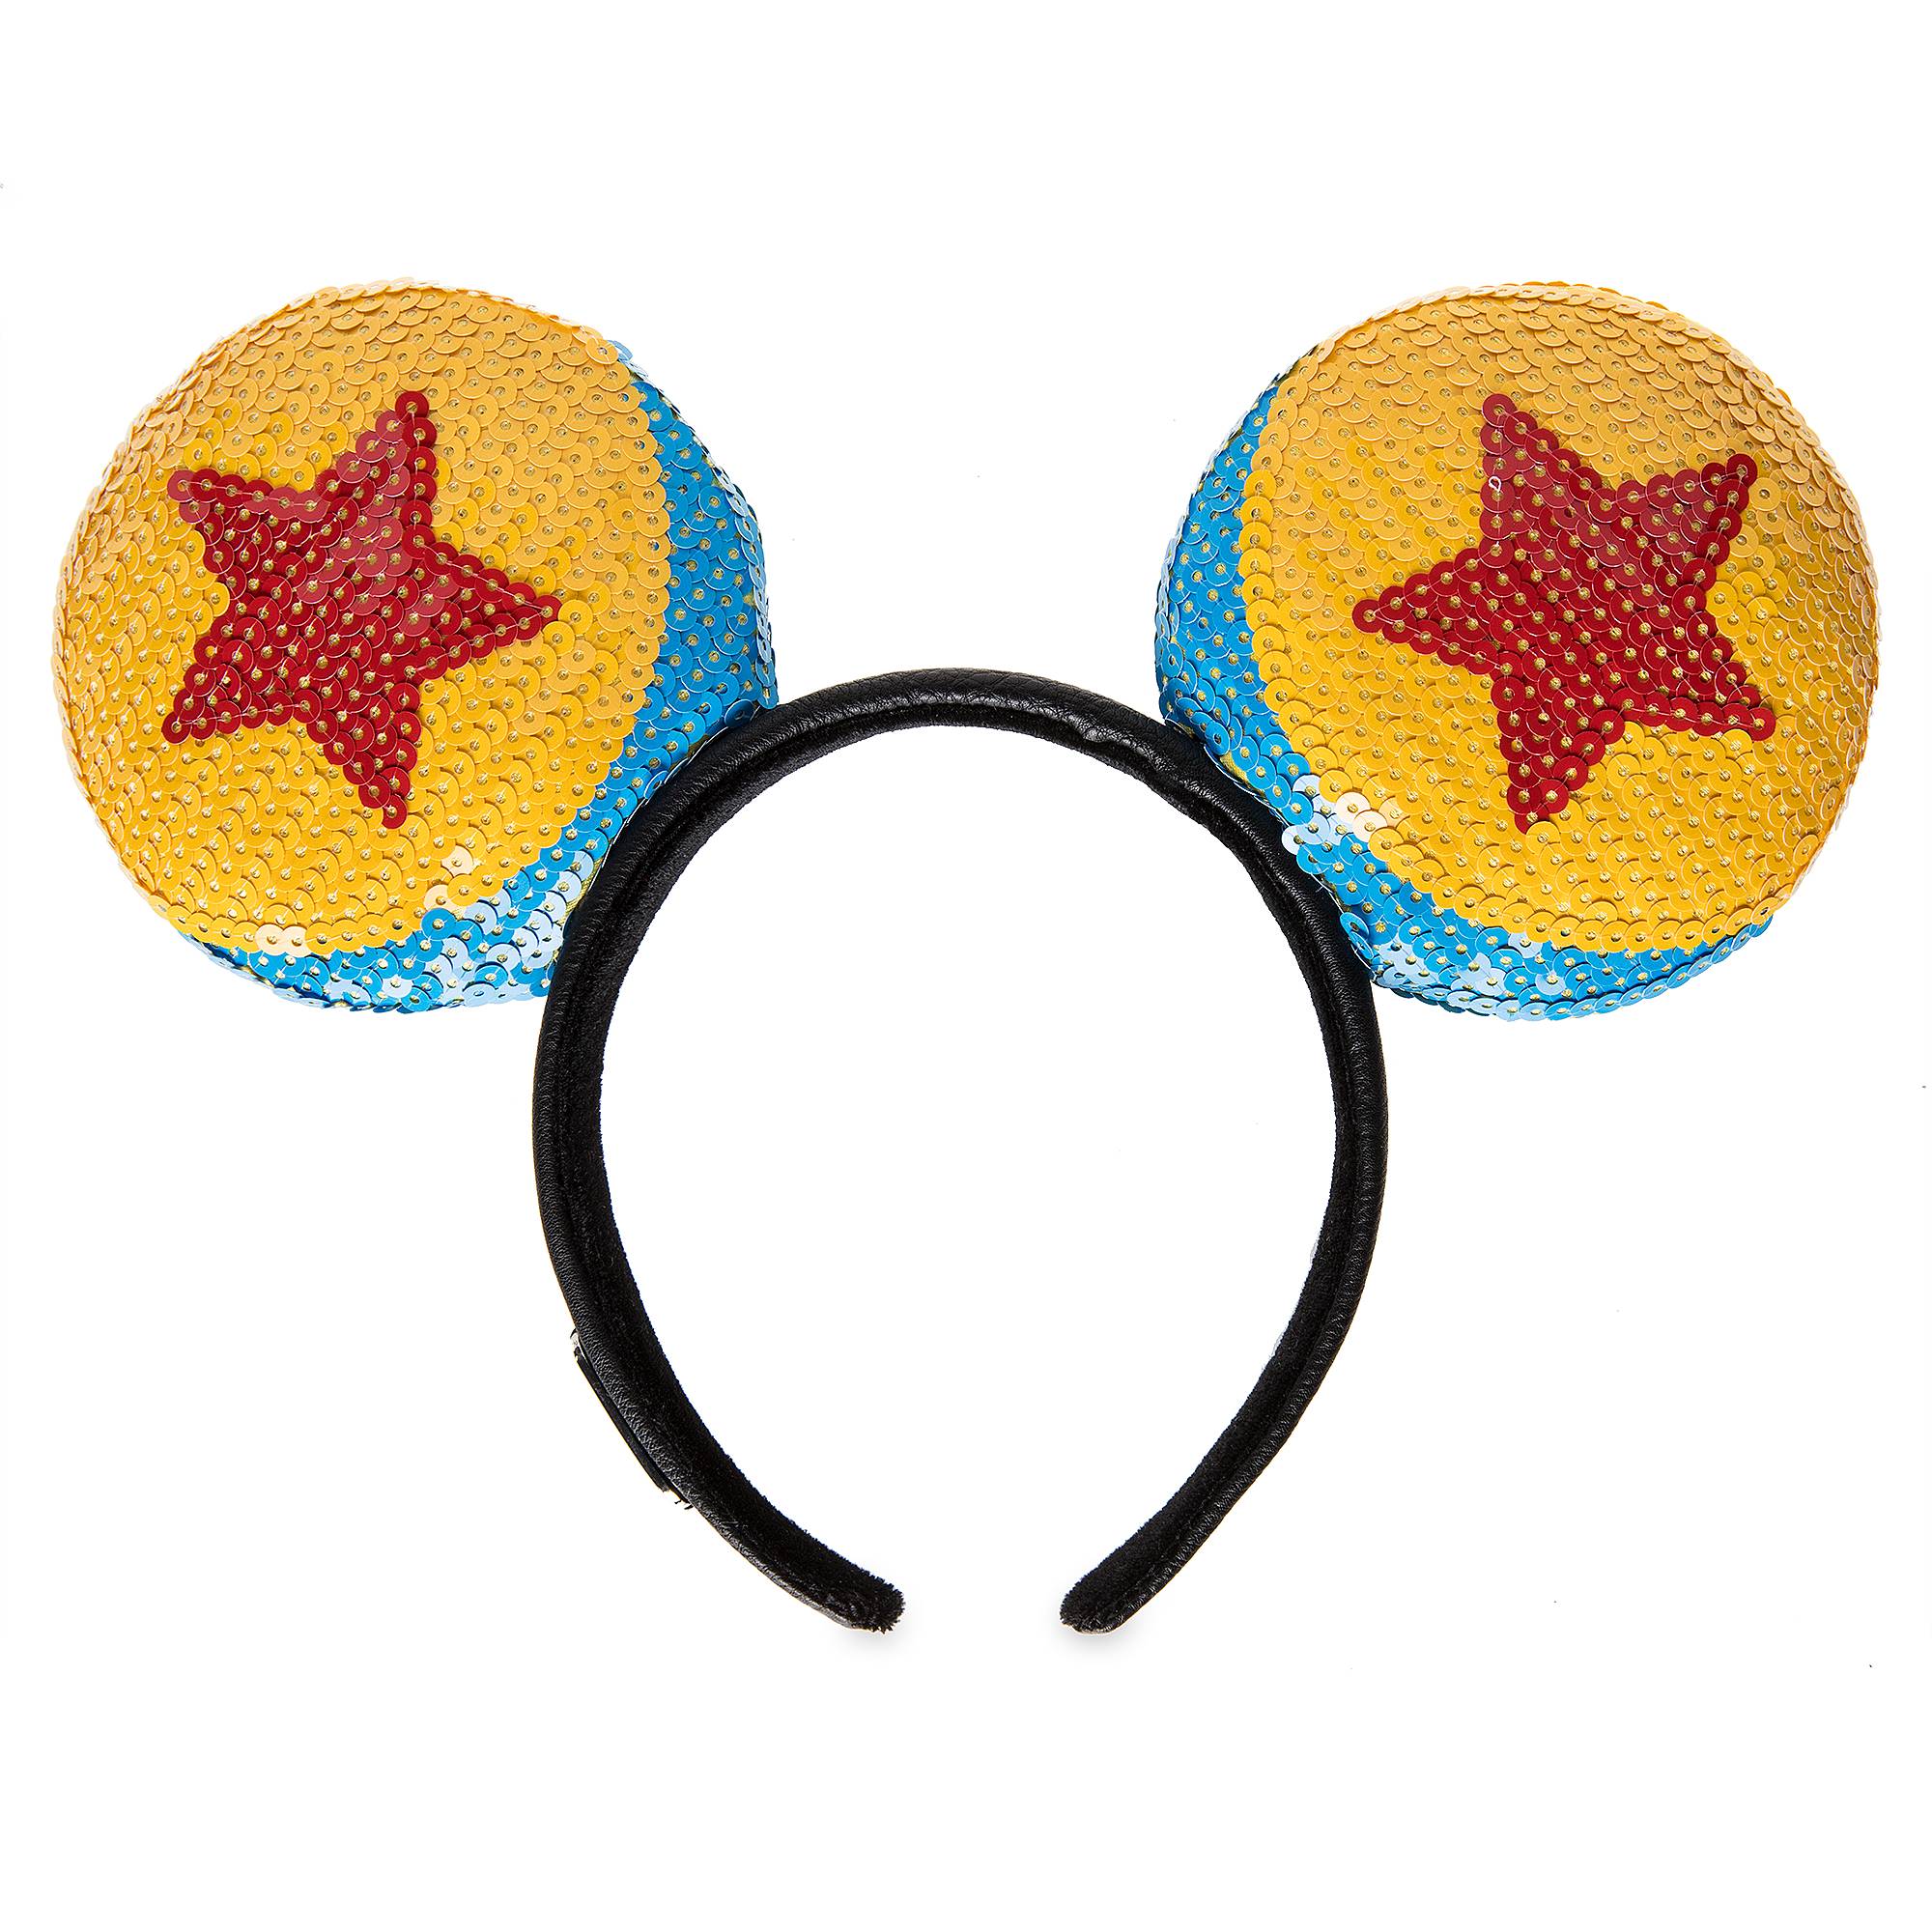 Pixar Ball Ear Headband for Adults by Loungefly image